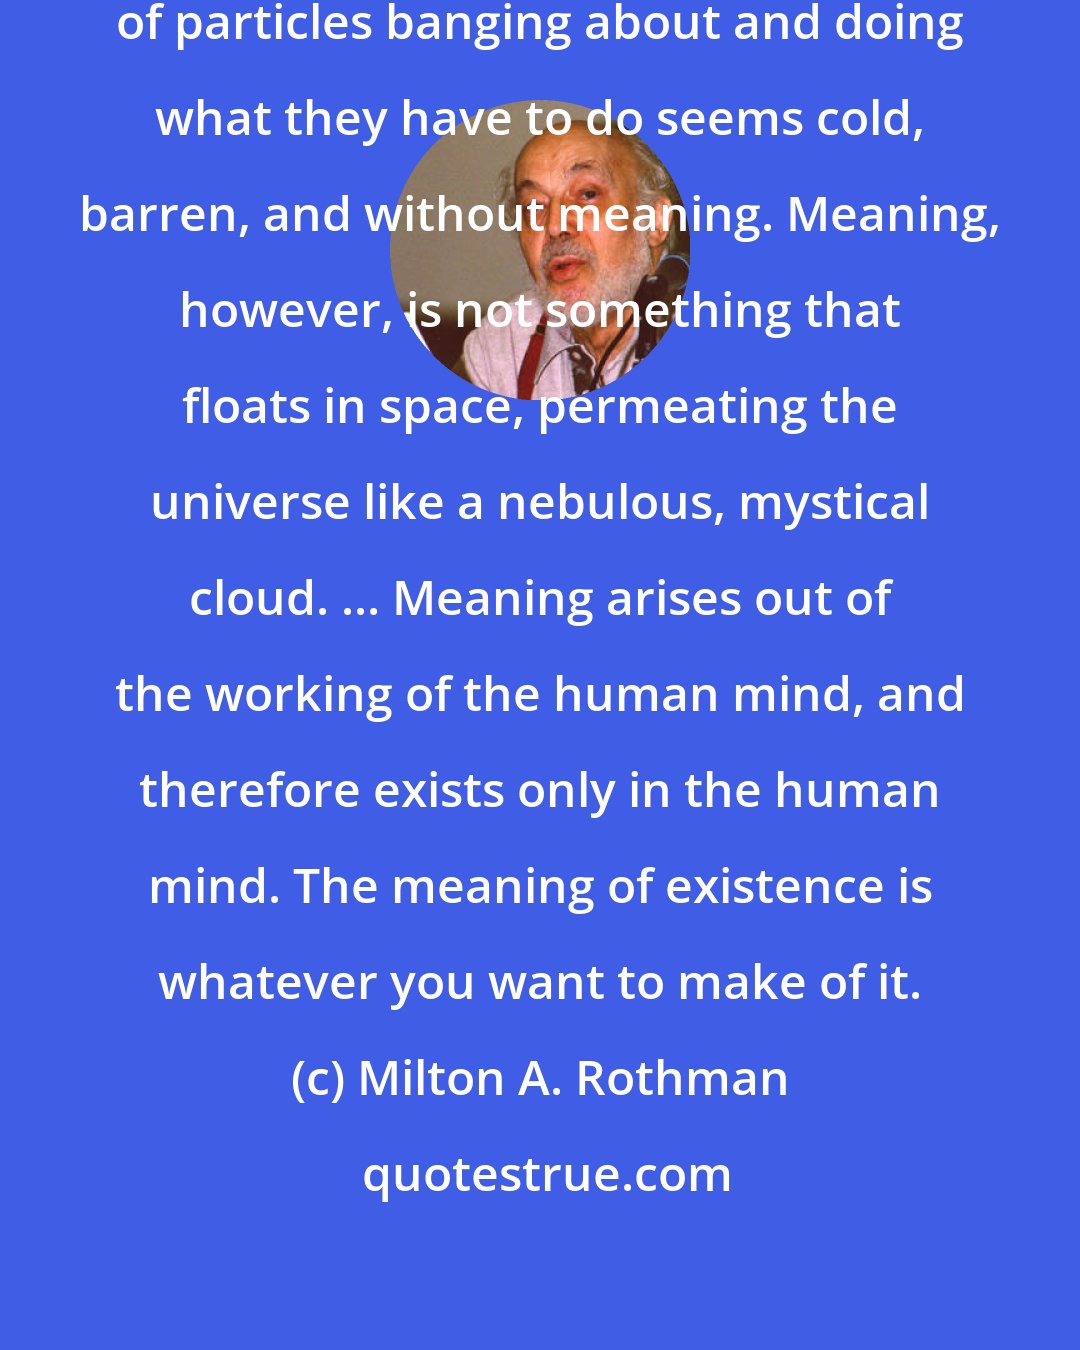 Milton A. Rothman: To most humans, a universe consisting of particles banging about and doing what they have to do seems cold, barren, and without meaning. Meaning, however, is not something that floats in space, permeating the universe like a nebulous, mystical cloud. ... Meaning arises out of the working of the human mind, and therefore exists only in the human mind. The meaning of existence is whatever you want to make of it.